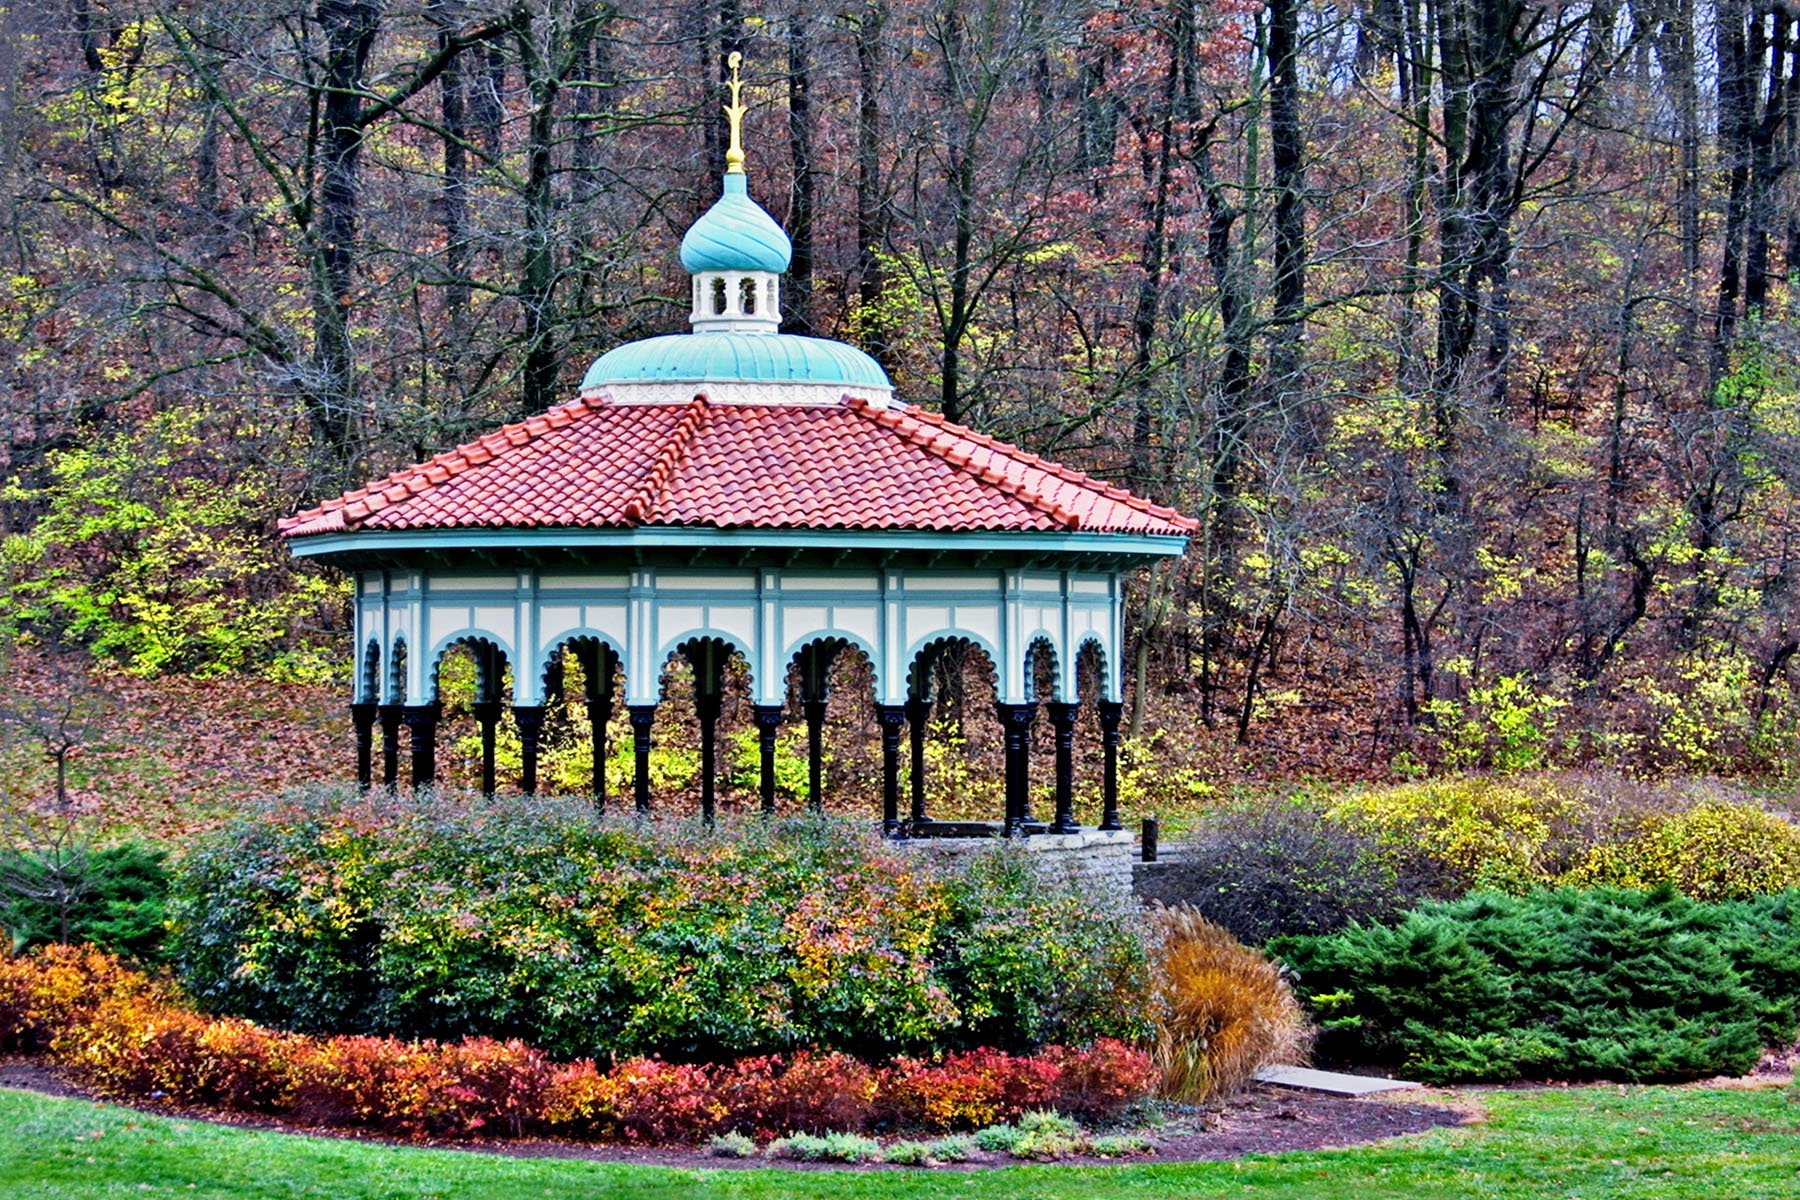 THE GAZEBO - I was there just after the gazebo in Eden Park had been given a fresh coat of paint.